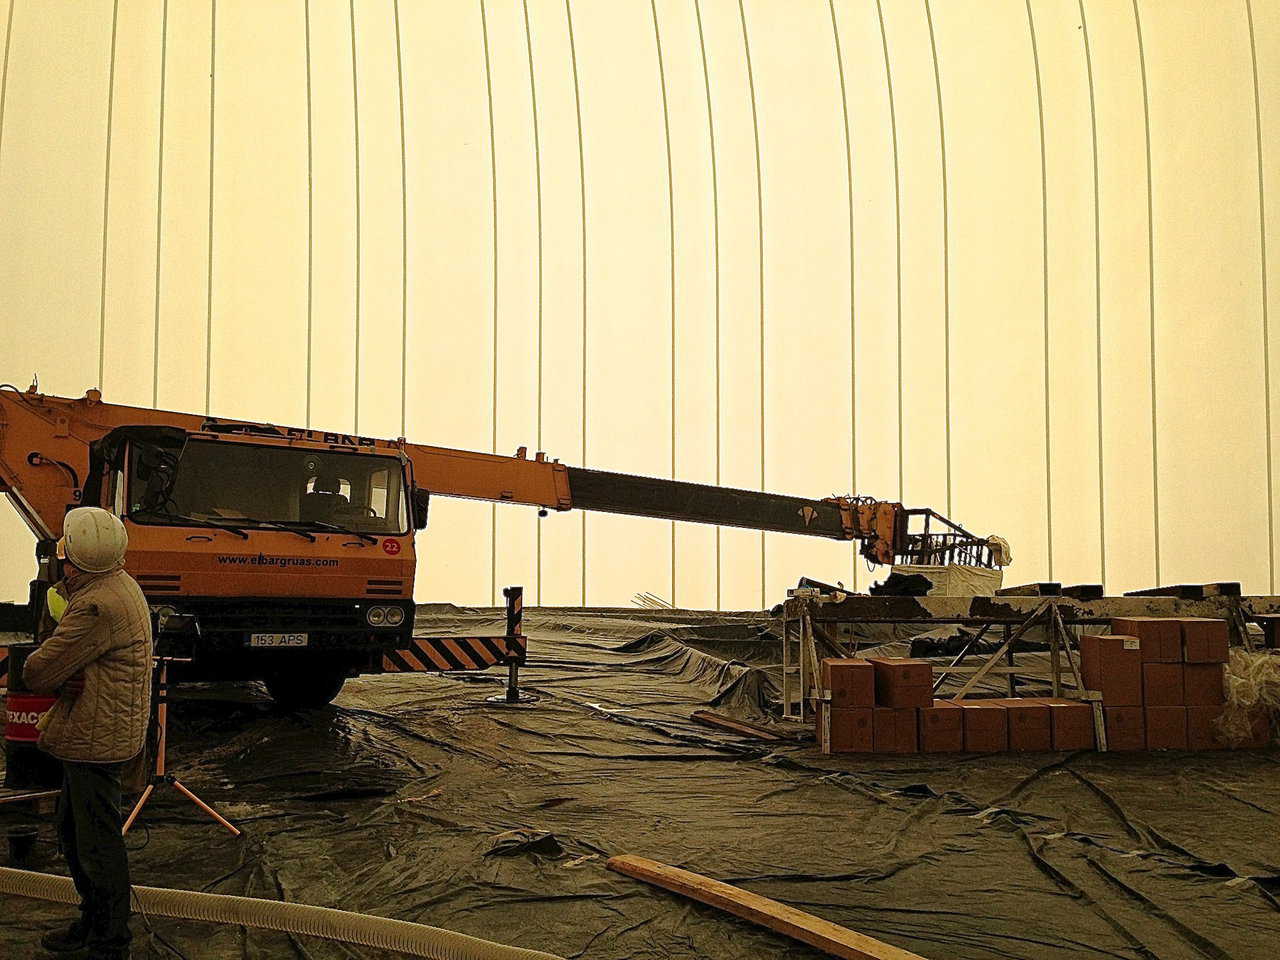 Airforms are spread over the equipment used to build the dome.